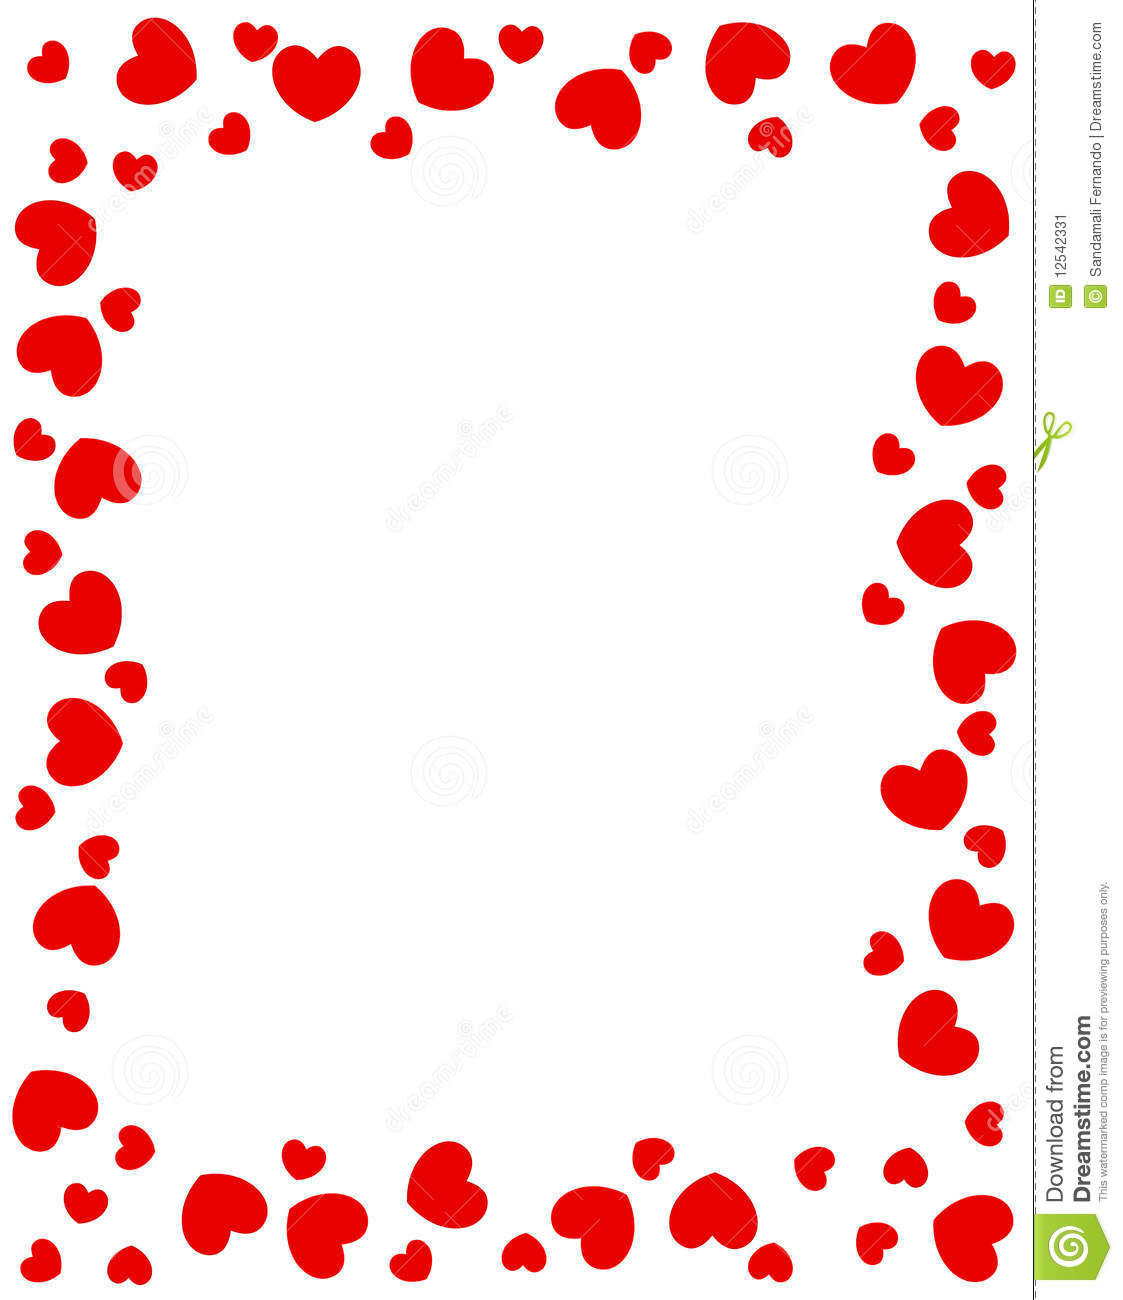 More Similar Stock Images Of   Red Hearts Border